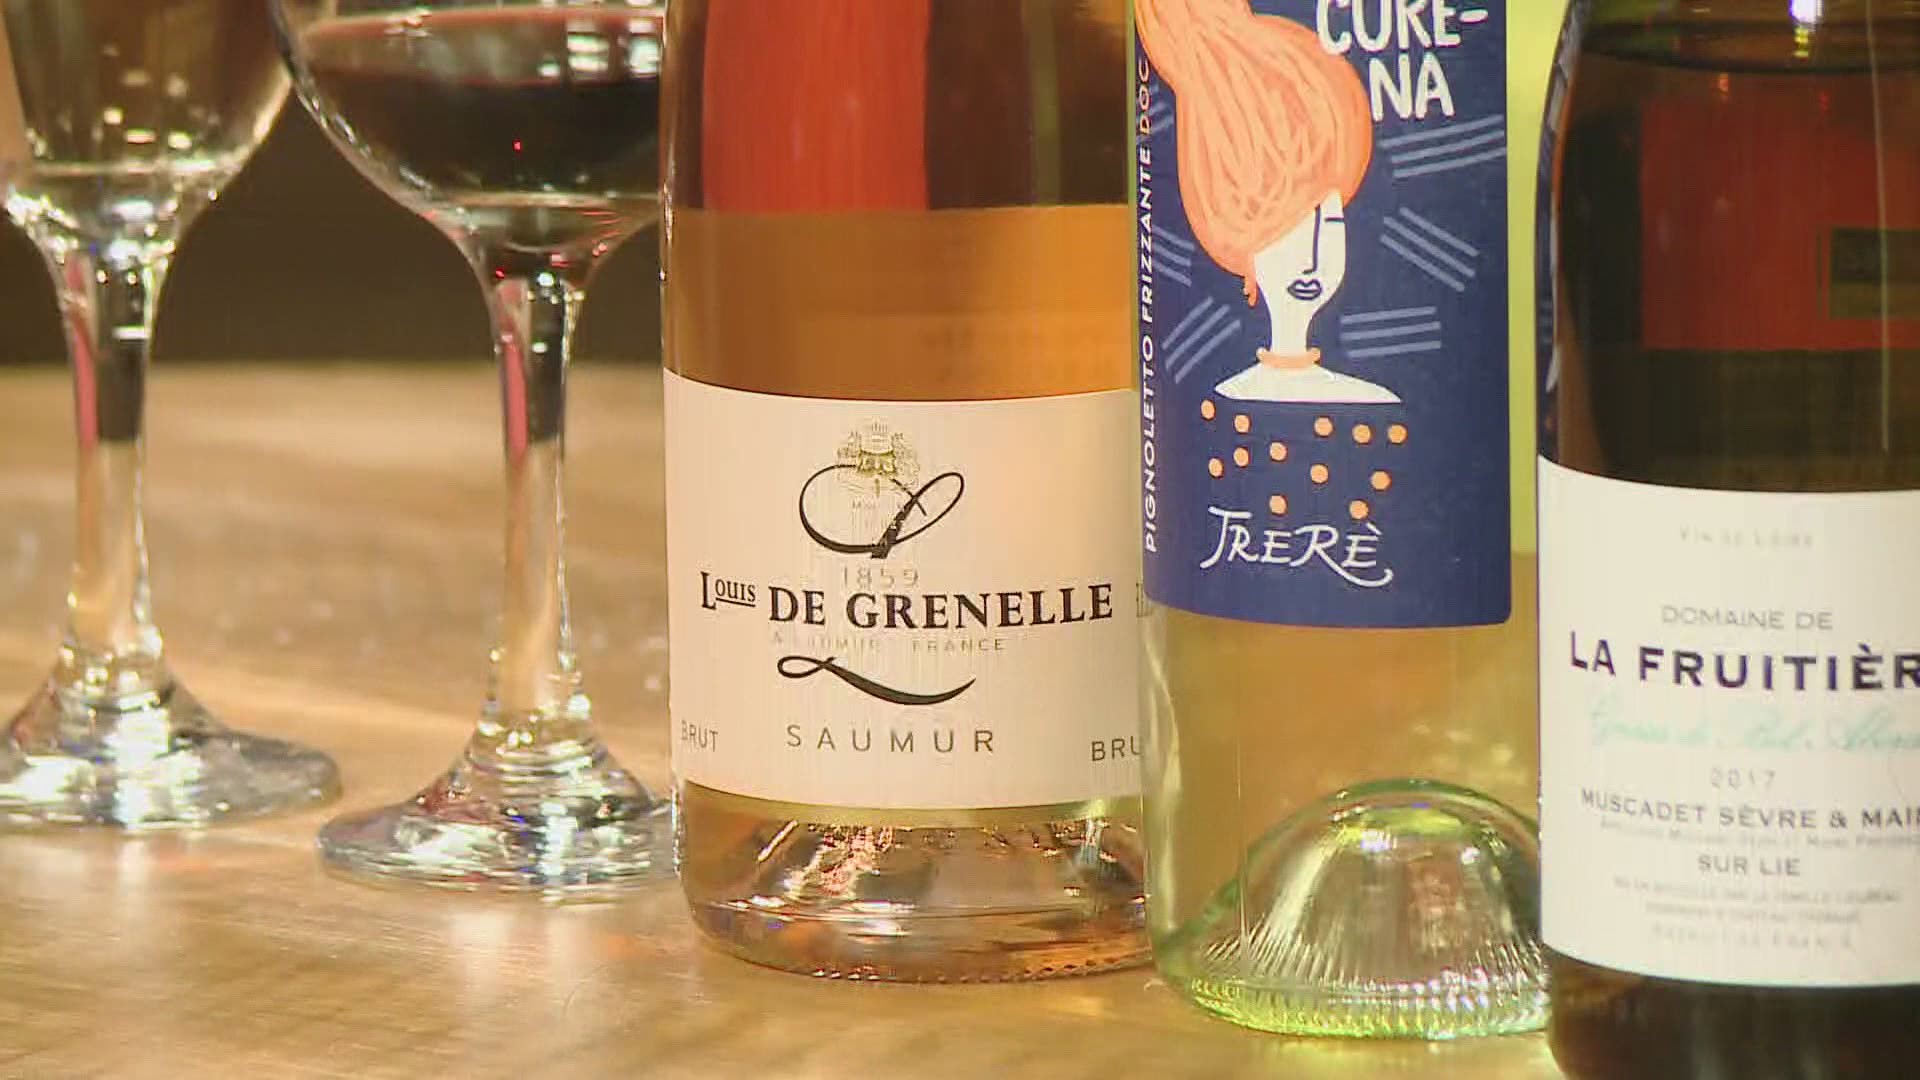 Maia Gosselin with Sip Wine Education has her budget friendly picks for Mother's Day wine pairings.